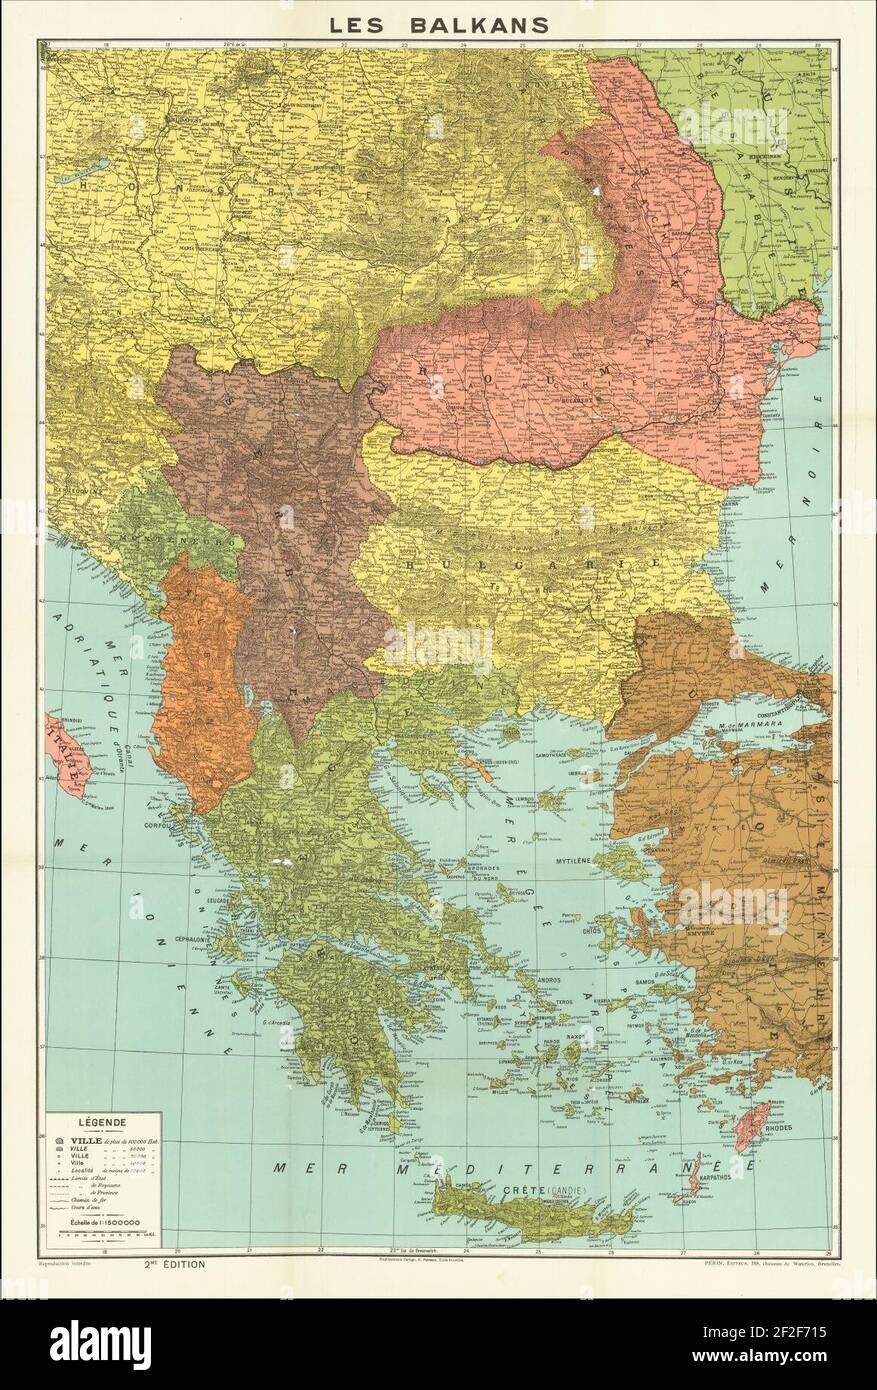 Pre-World War I map of the Balkan peninsula showing the borders after the treaty of Treaty of Bucharest in 1913. Stock Photo